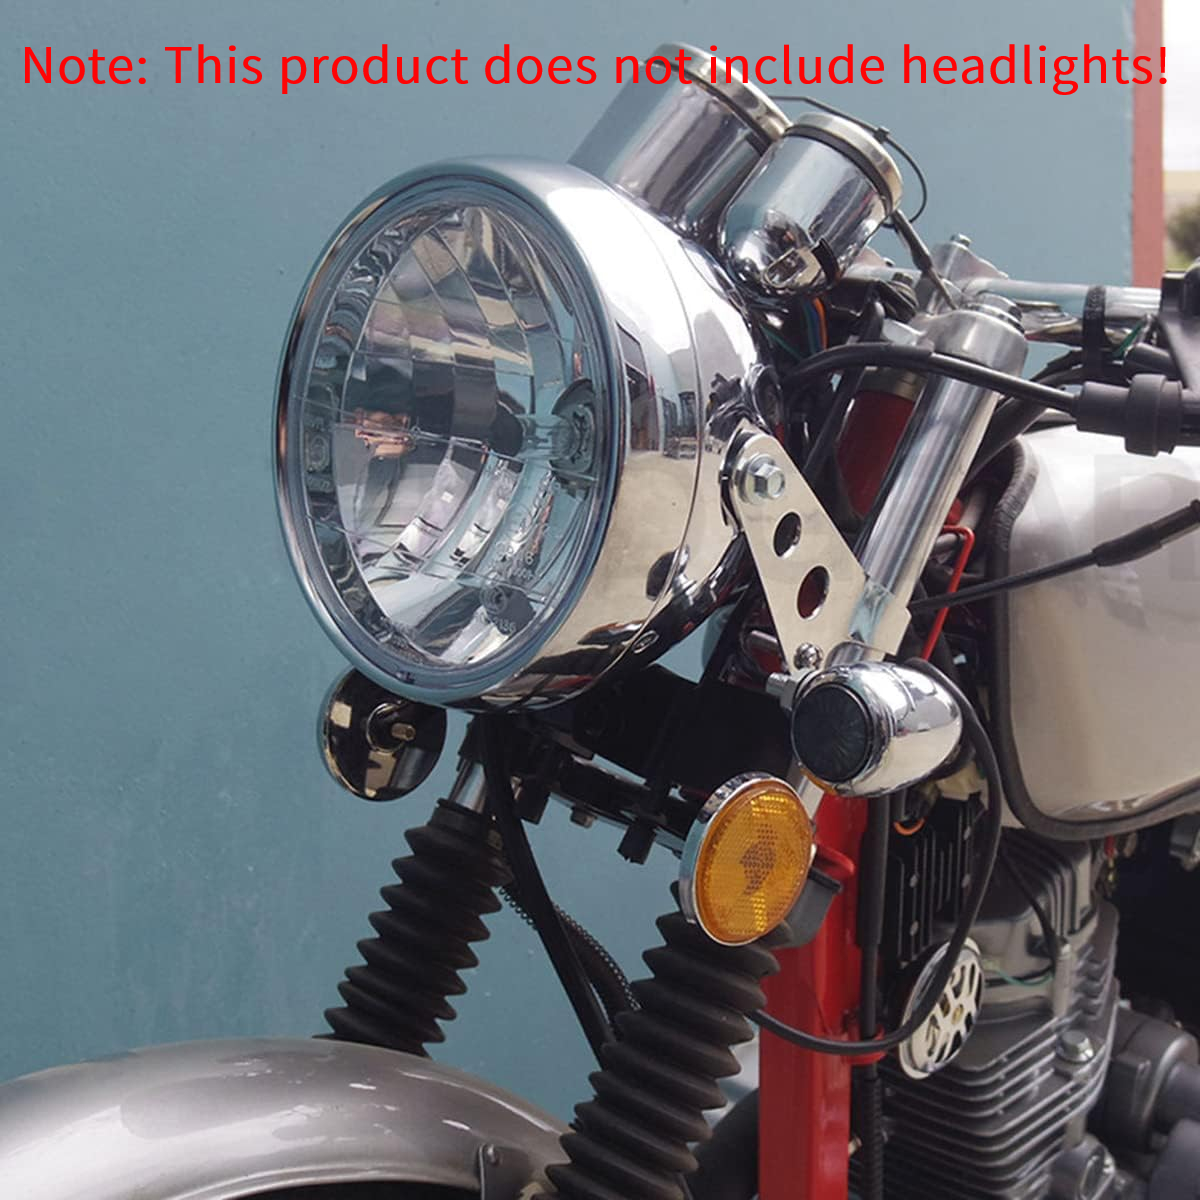 Motorcycle Headlight Assembly Casing for All 5.75 LED Headlamp in Chrome  Harley - Original Cafe Racer